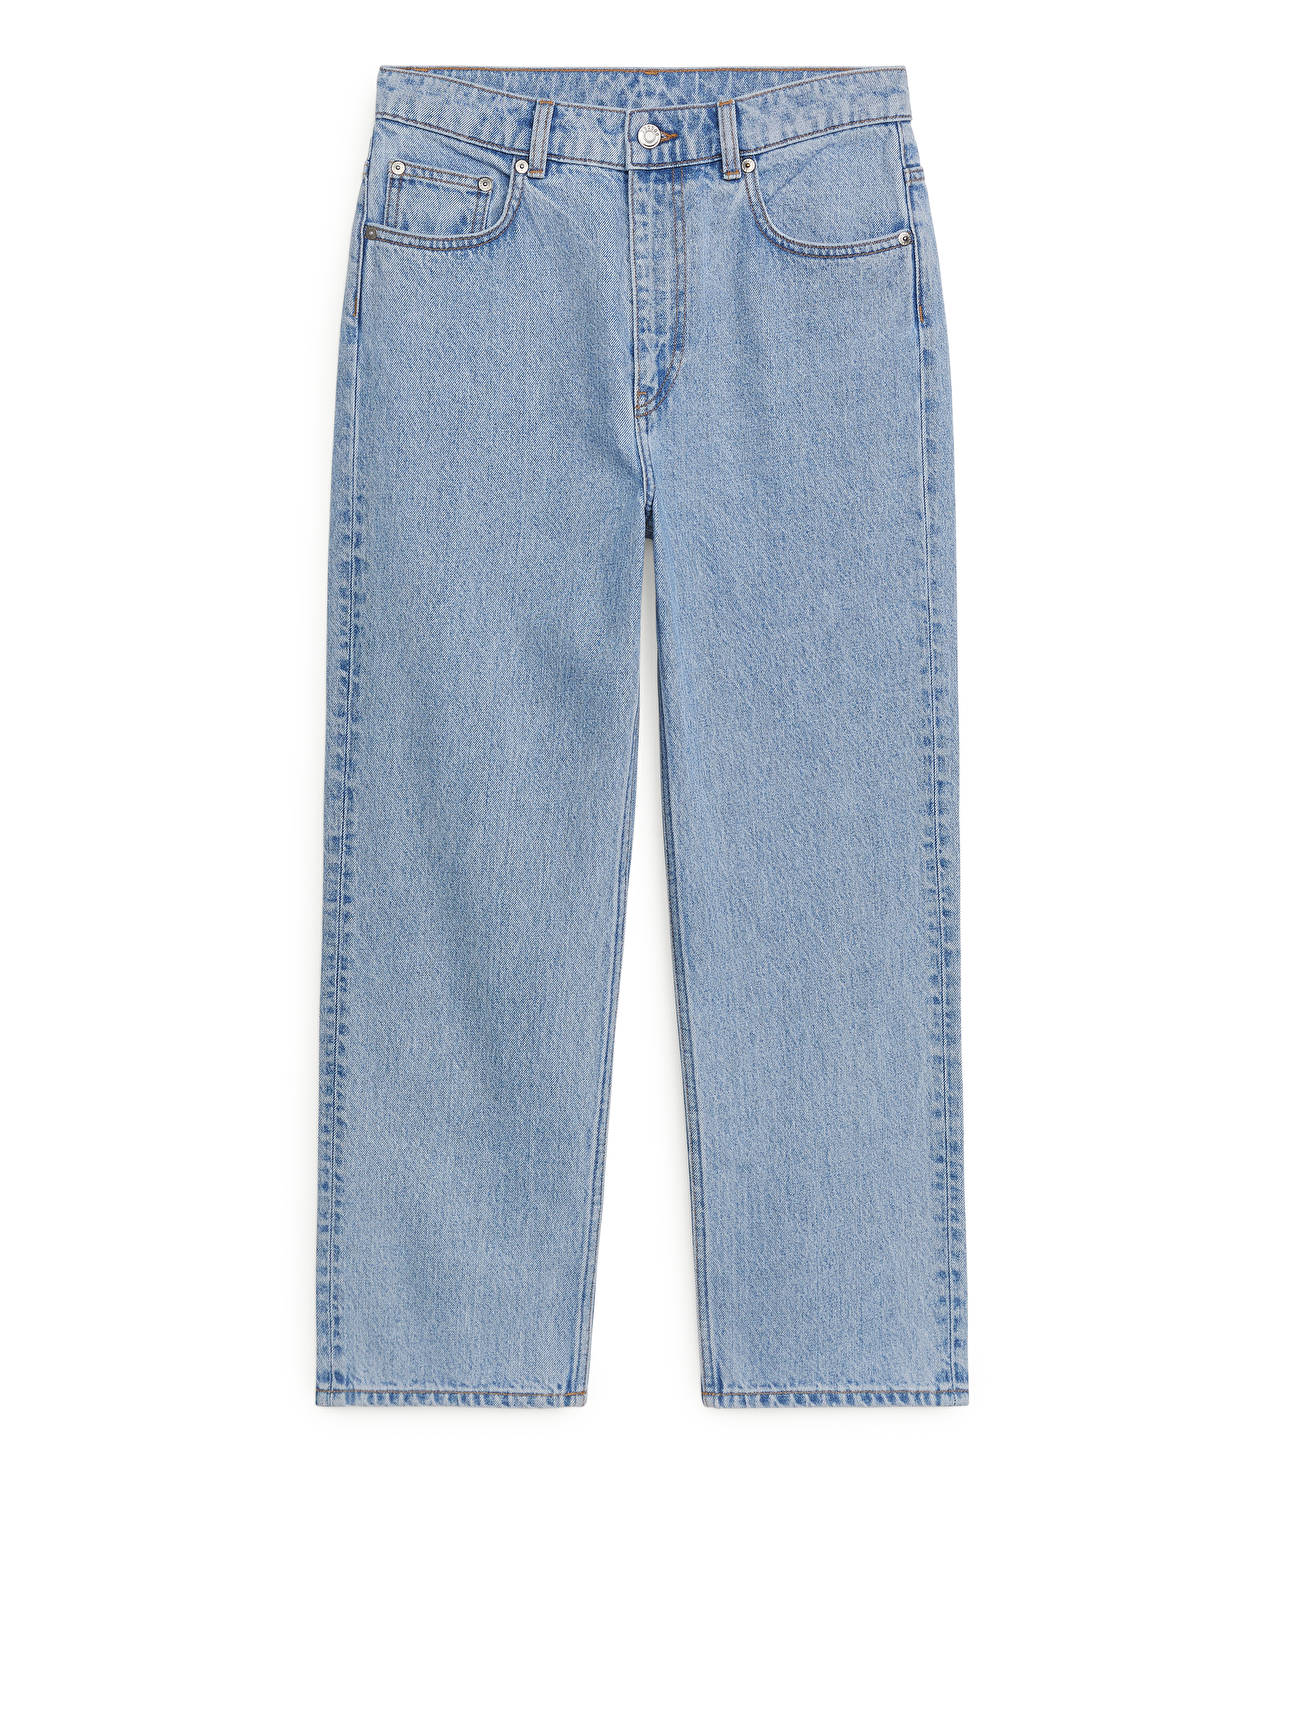 Arket Straight Cropped Jeans